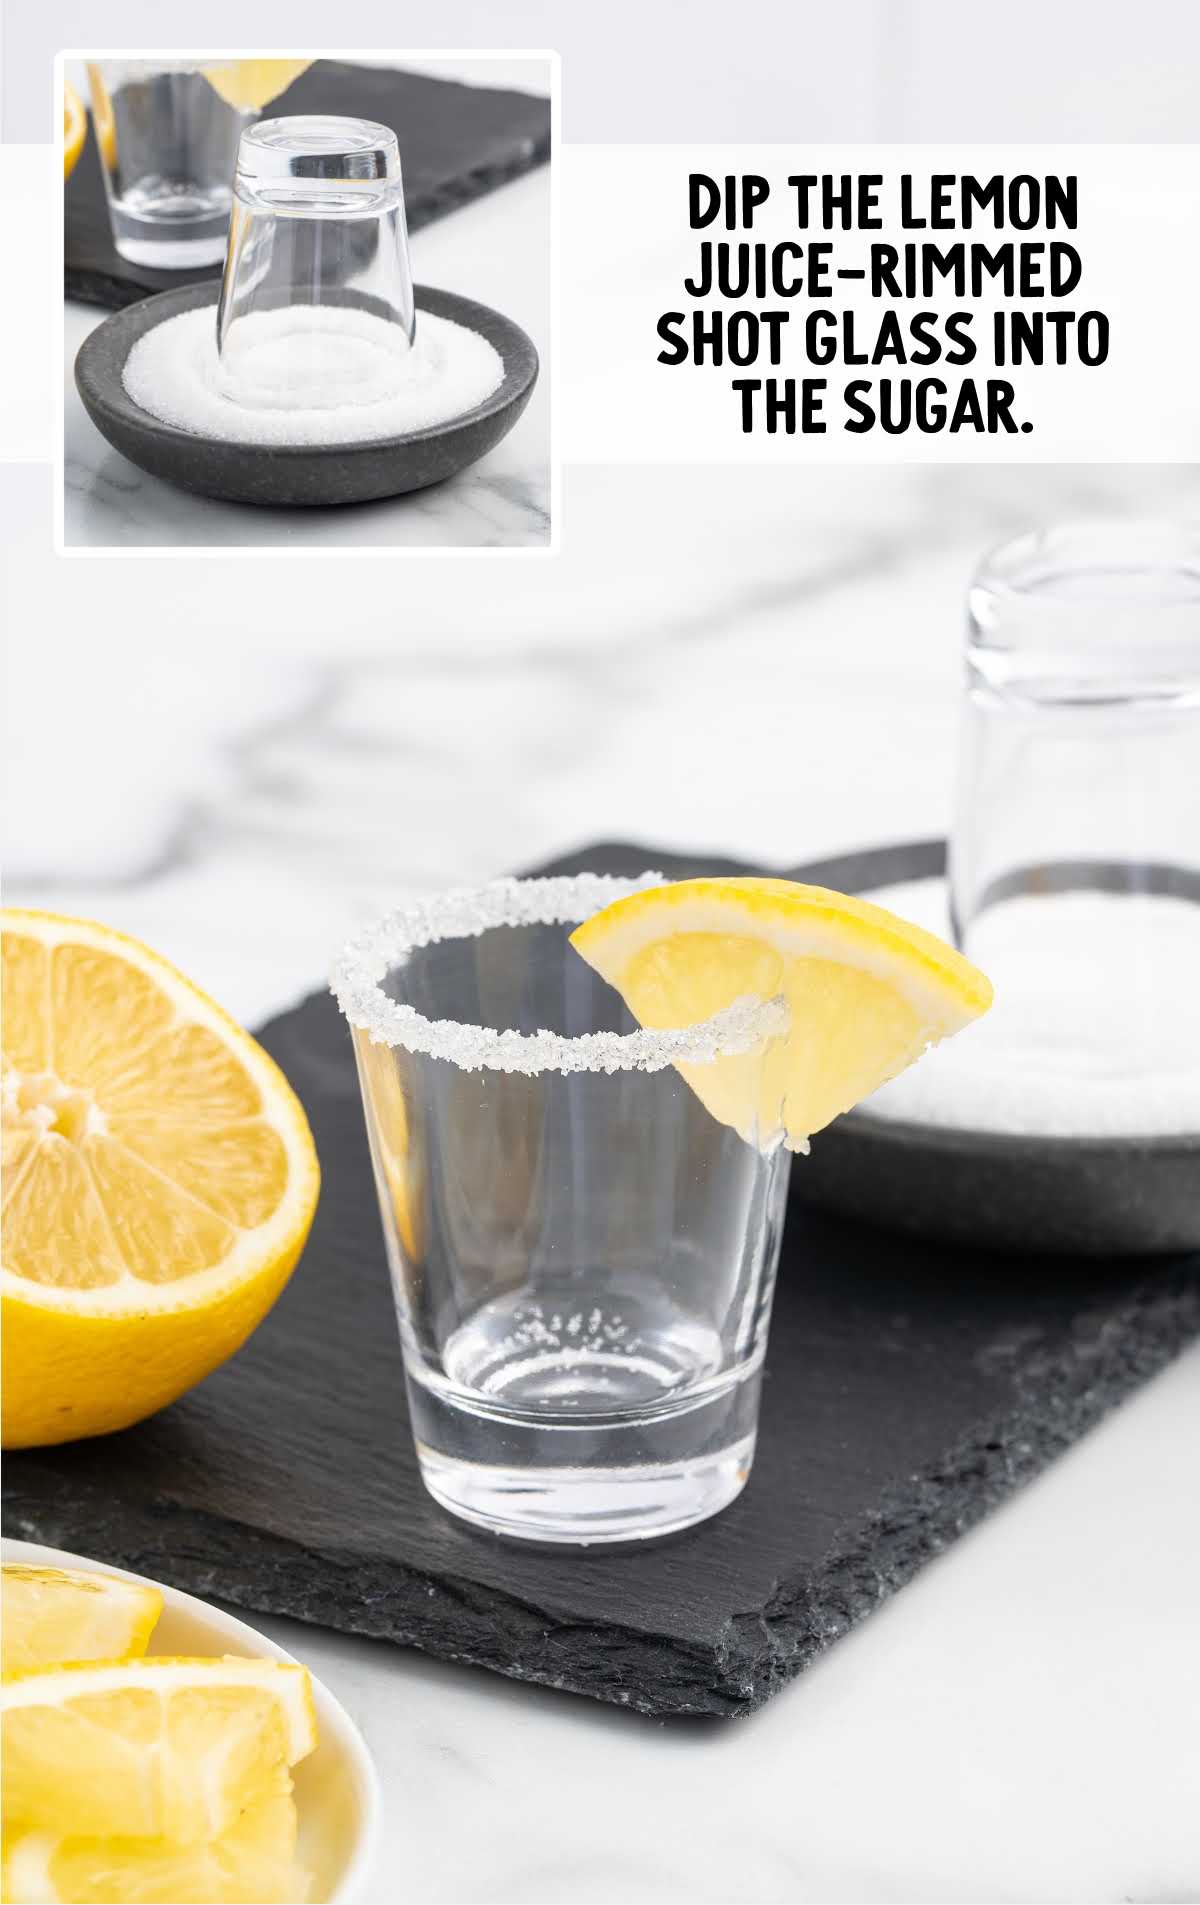 shot glass dipped into the sugar and garnished with a slice of lemon